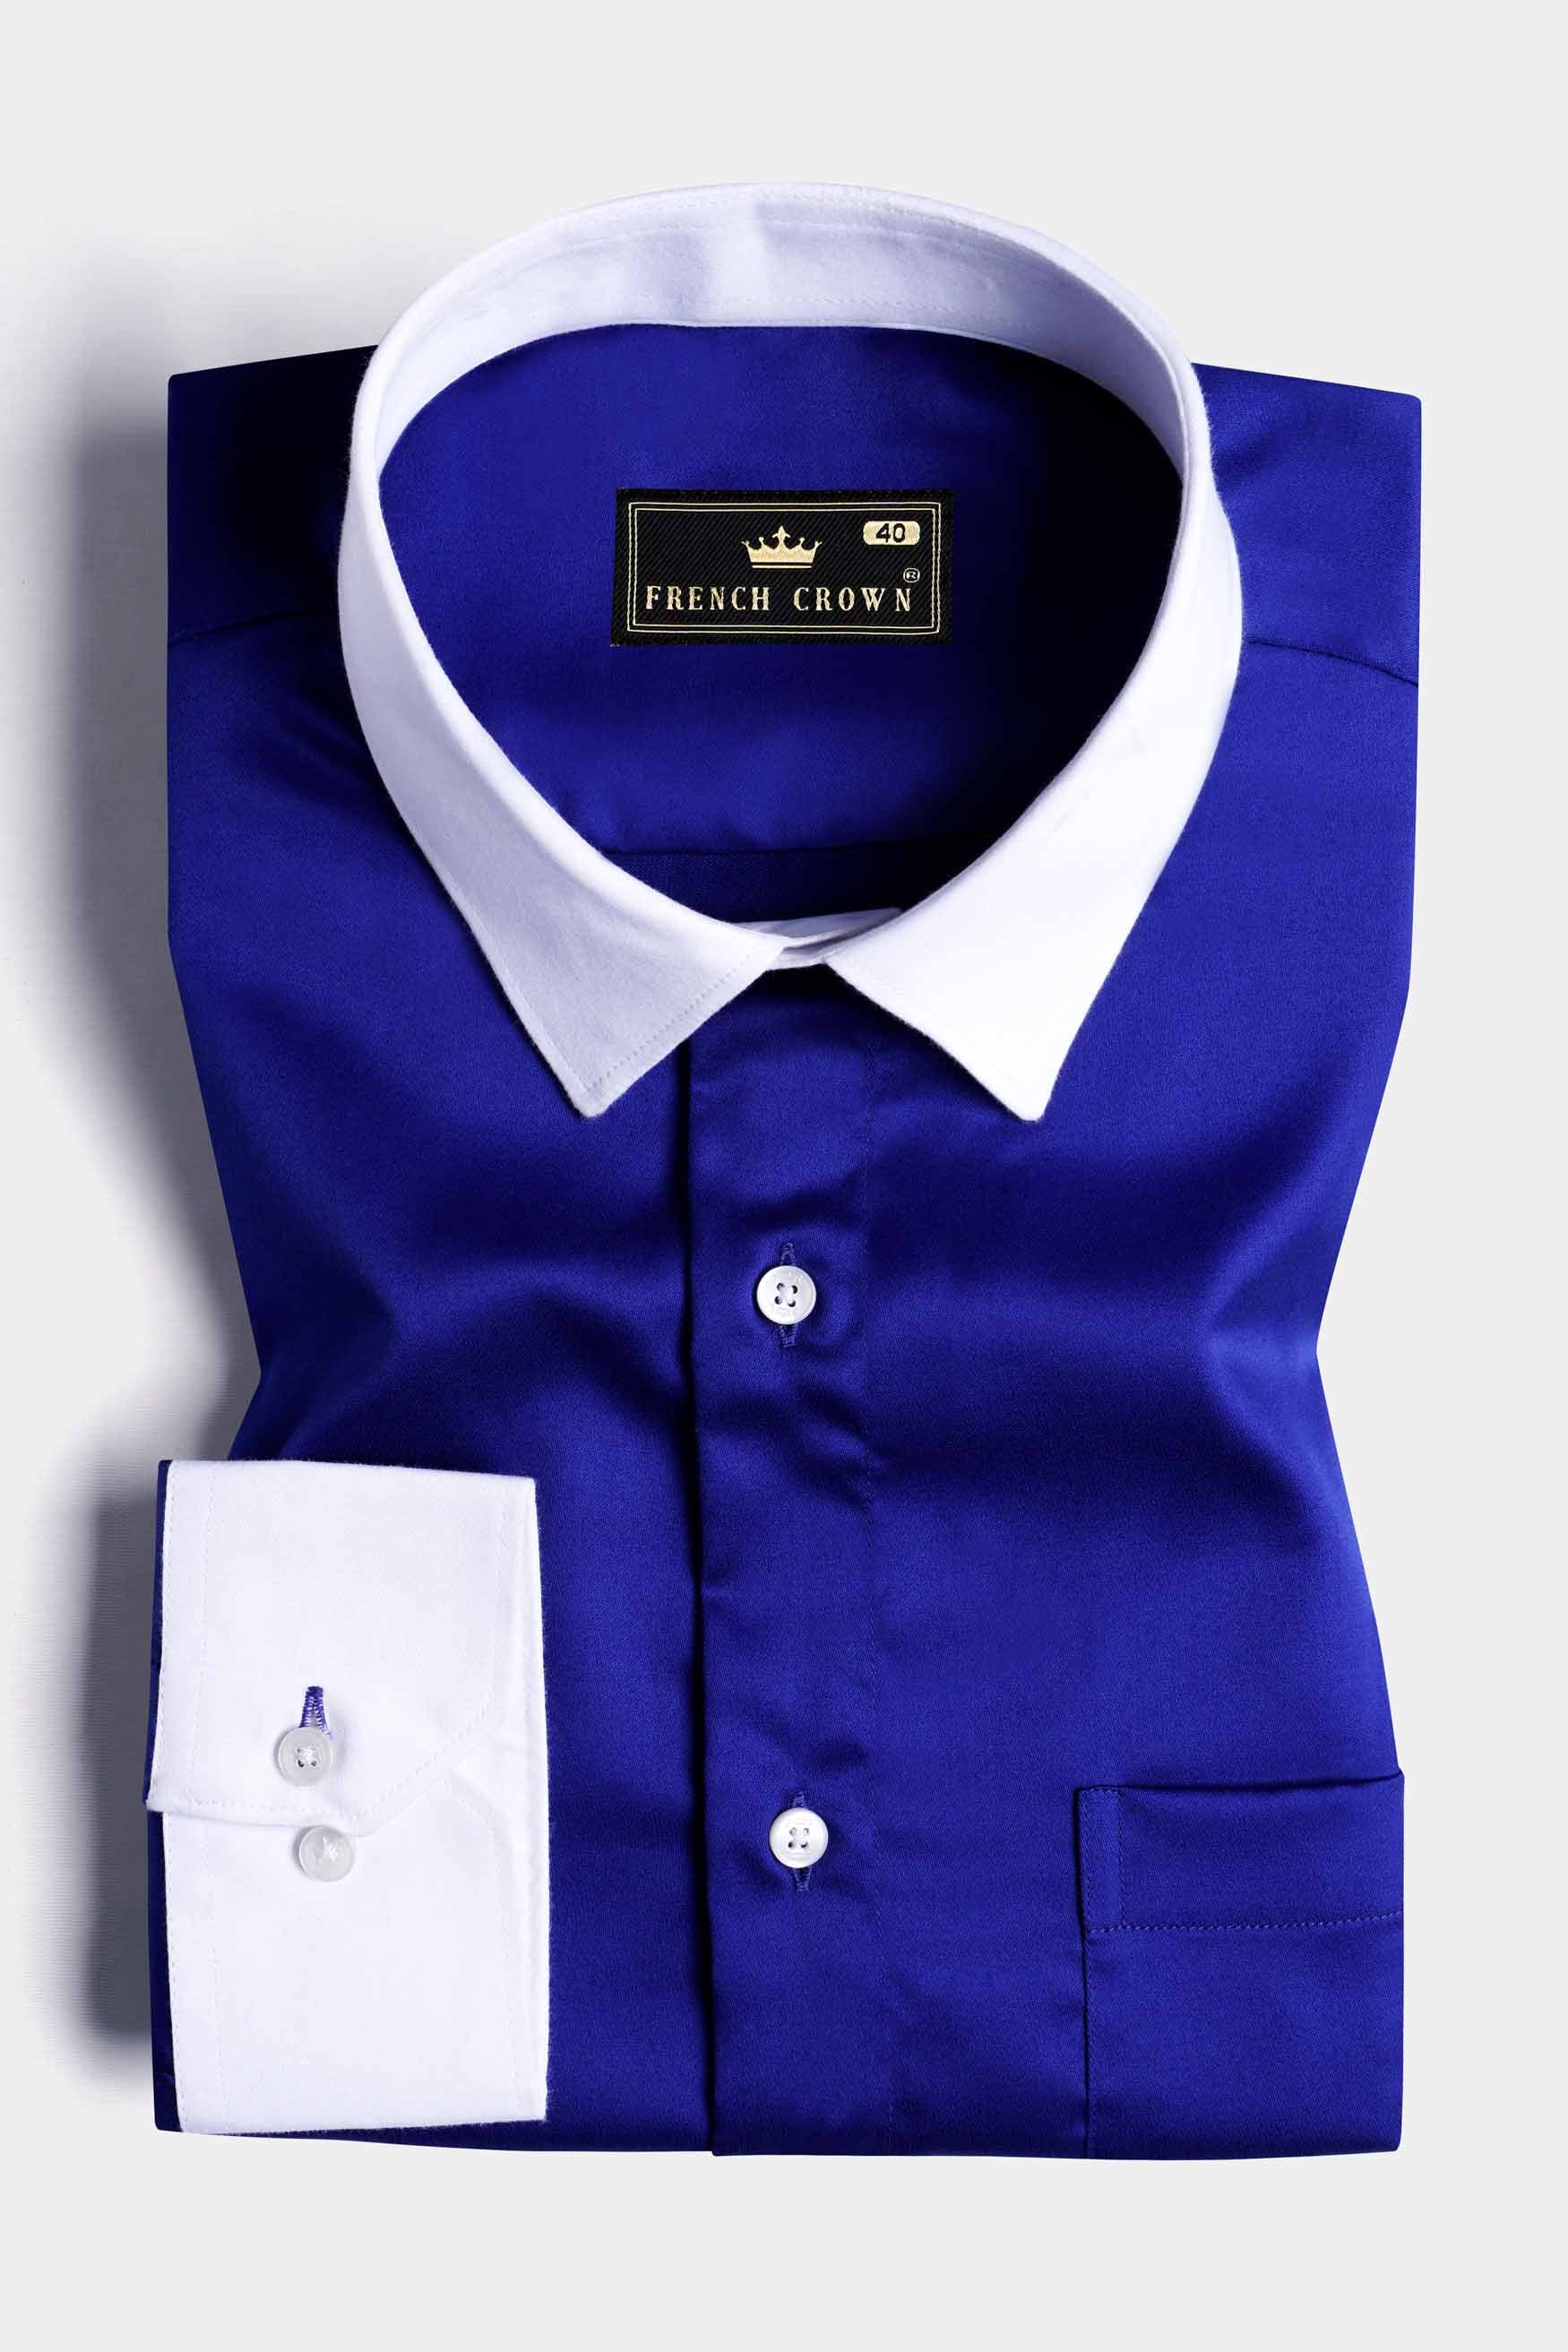 Catalina Blue with White Cuffs and Collar Subtle Sheen Super Soft Premium Cotton Shirt 11583-WCC-38, 11583-WCC-H-38, 11583-WCC-39, 11583-WCC-H-39, 11583-WCC-40, 11583-WCC-H-40, 11583-WCC-42, 11583-WCC-H-42, 11583-WCC-44, 11583-WCC-H-44, 11583-WCC-46, 11583-WCC-H-46, 11583-WCC-48, 11583-WCC-H-48, 11583-WCC-50, 11583-WCC-H-50, 11583-WCC-52, 11583-WCC-H-52